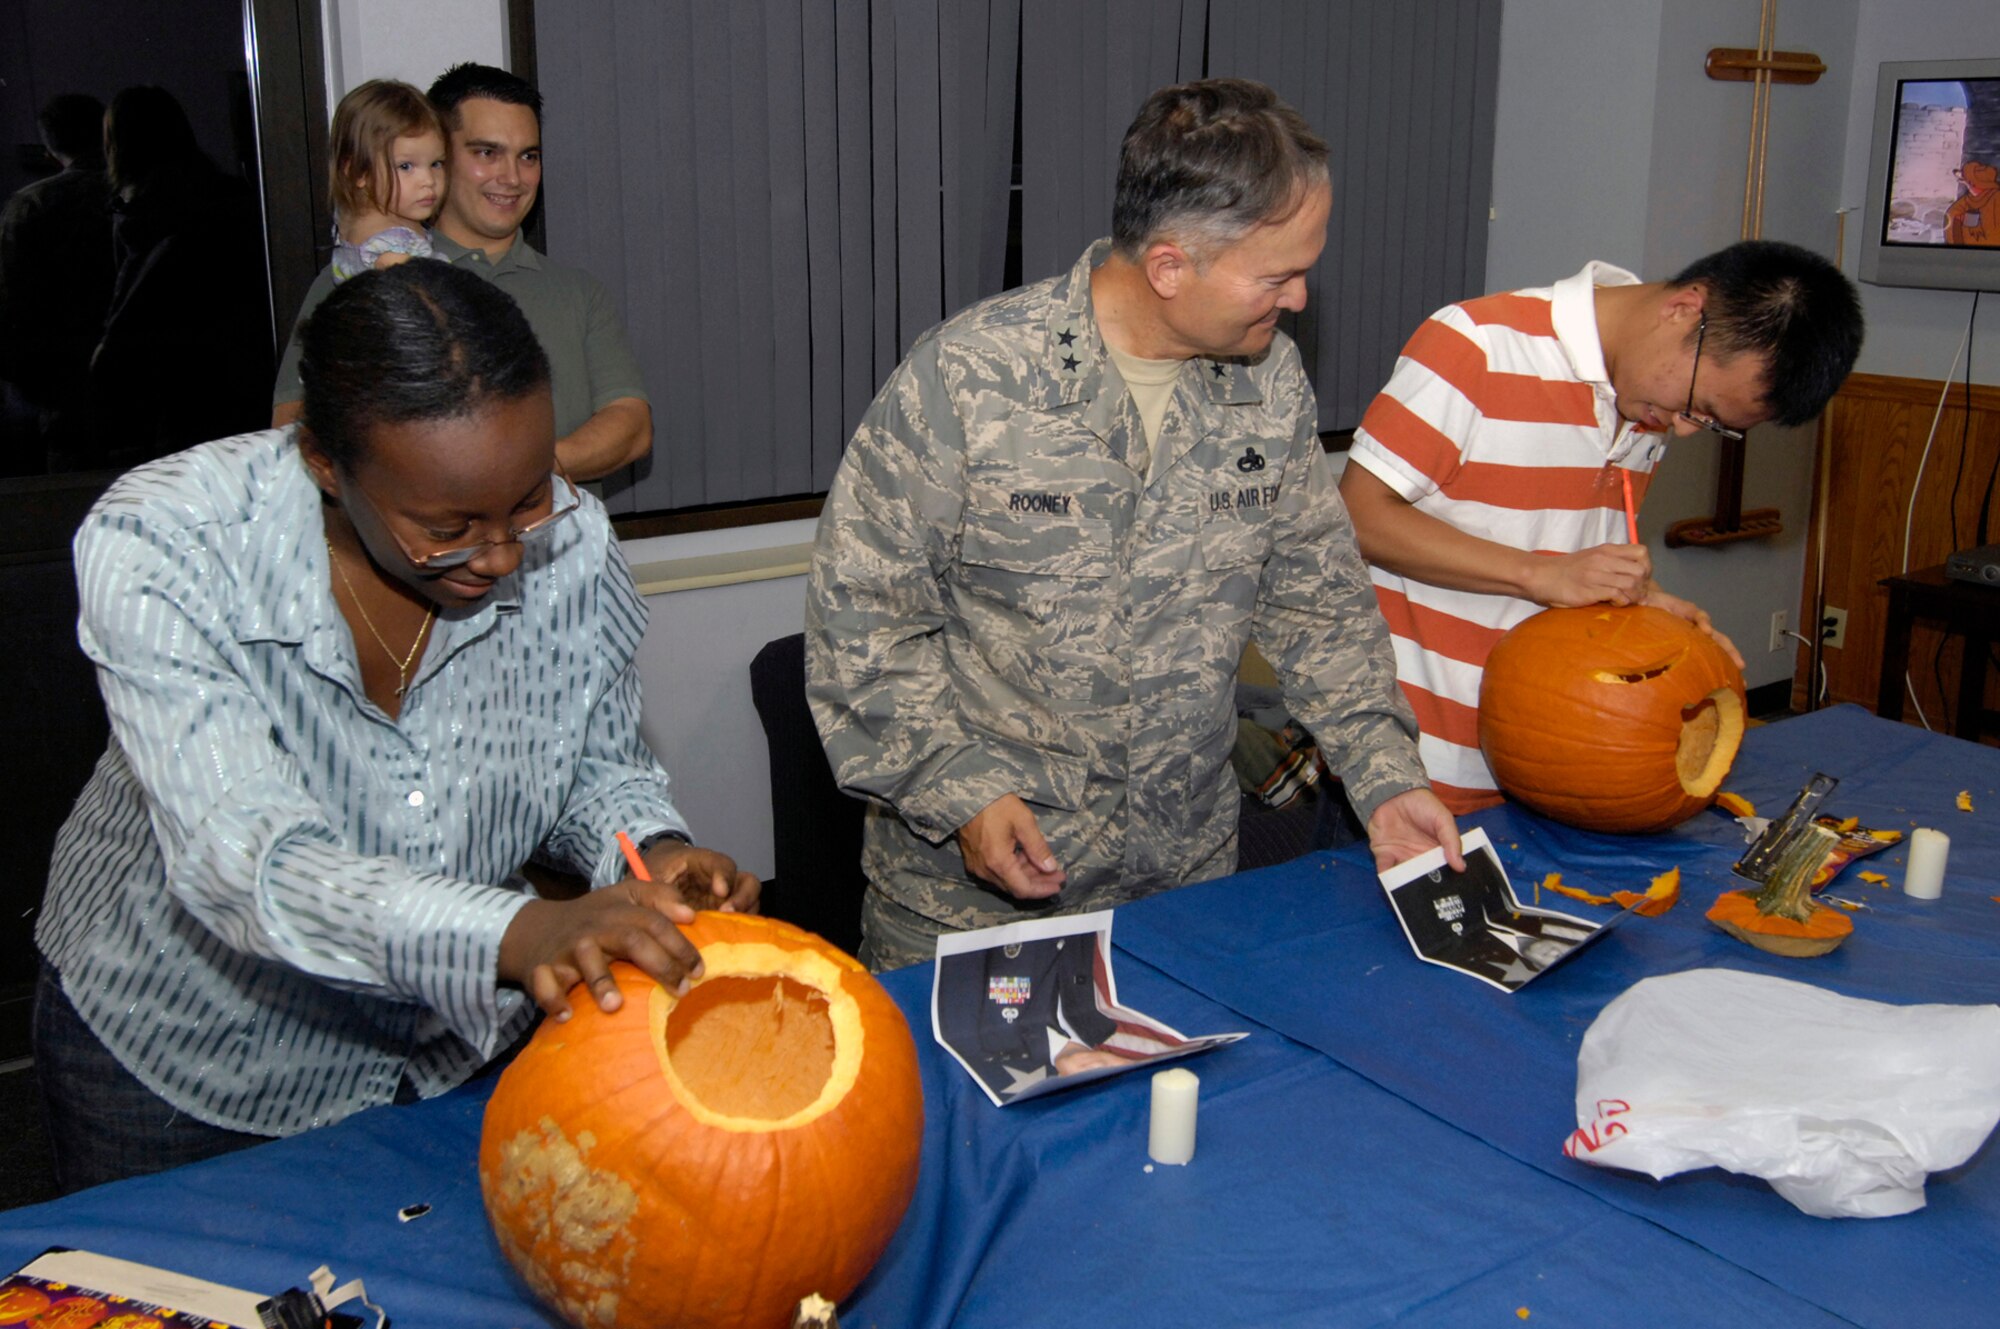 HANSCOM AFB, Mass. -- Airman First Class Latashia White (left), 753rd Electronic Systems Group, and Airman First Class Dong Li, 66th Medical Operations Squadron dental technician, carve pumpkins that try and resemble Retired Maj. Gen. Art Rooney (center). The pumpkin carving was part of a Dorm Dinner held Oct. 23. (U.S. Air Force photo by Mark Wyatt.)
